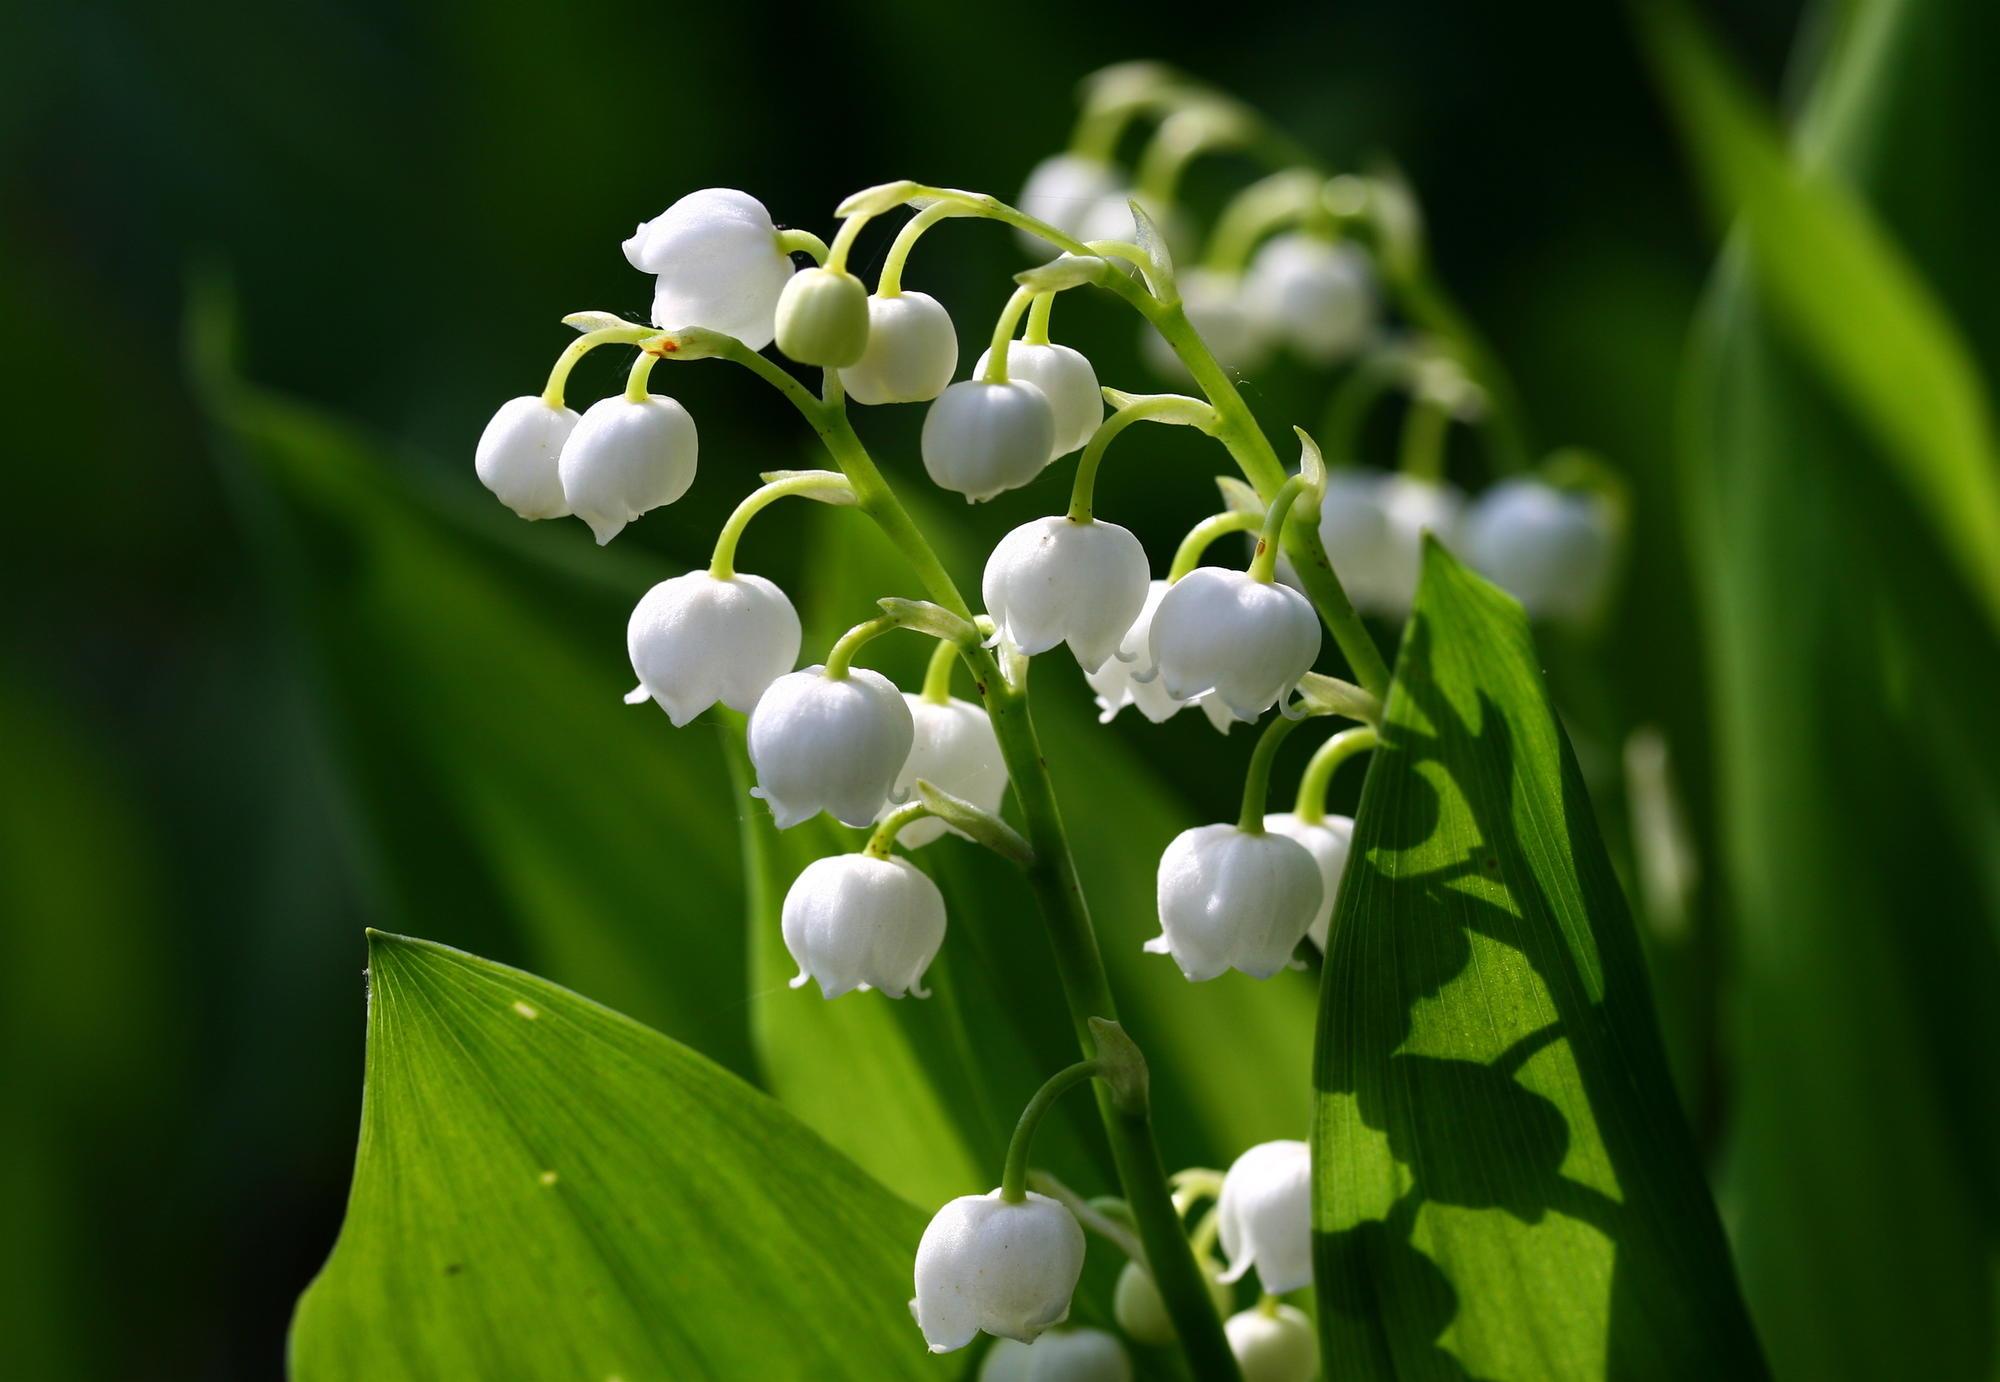 white cup-shaped fringed flowers dangling from green stems amid thick green leaves